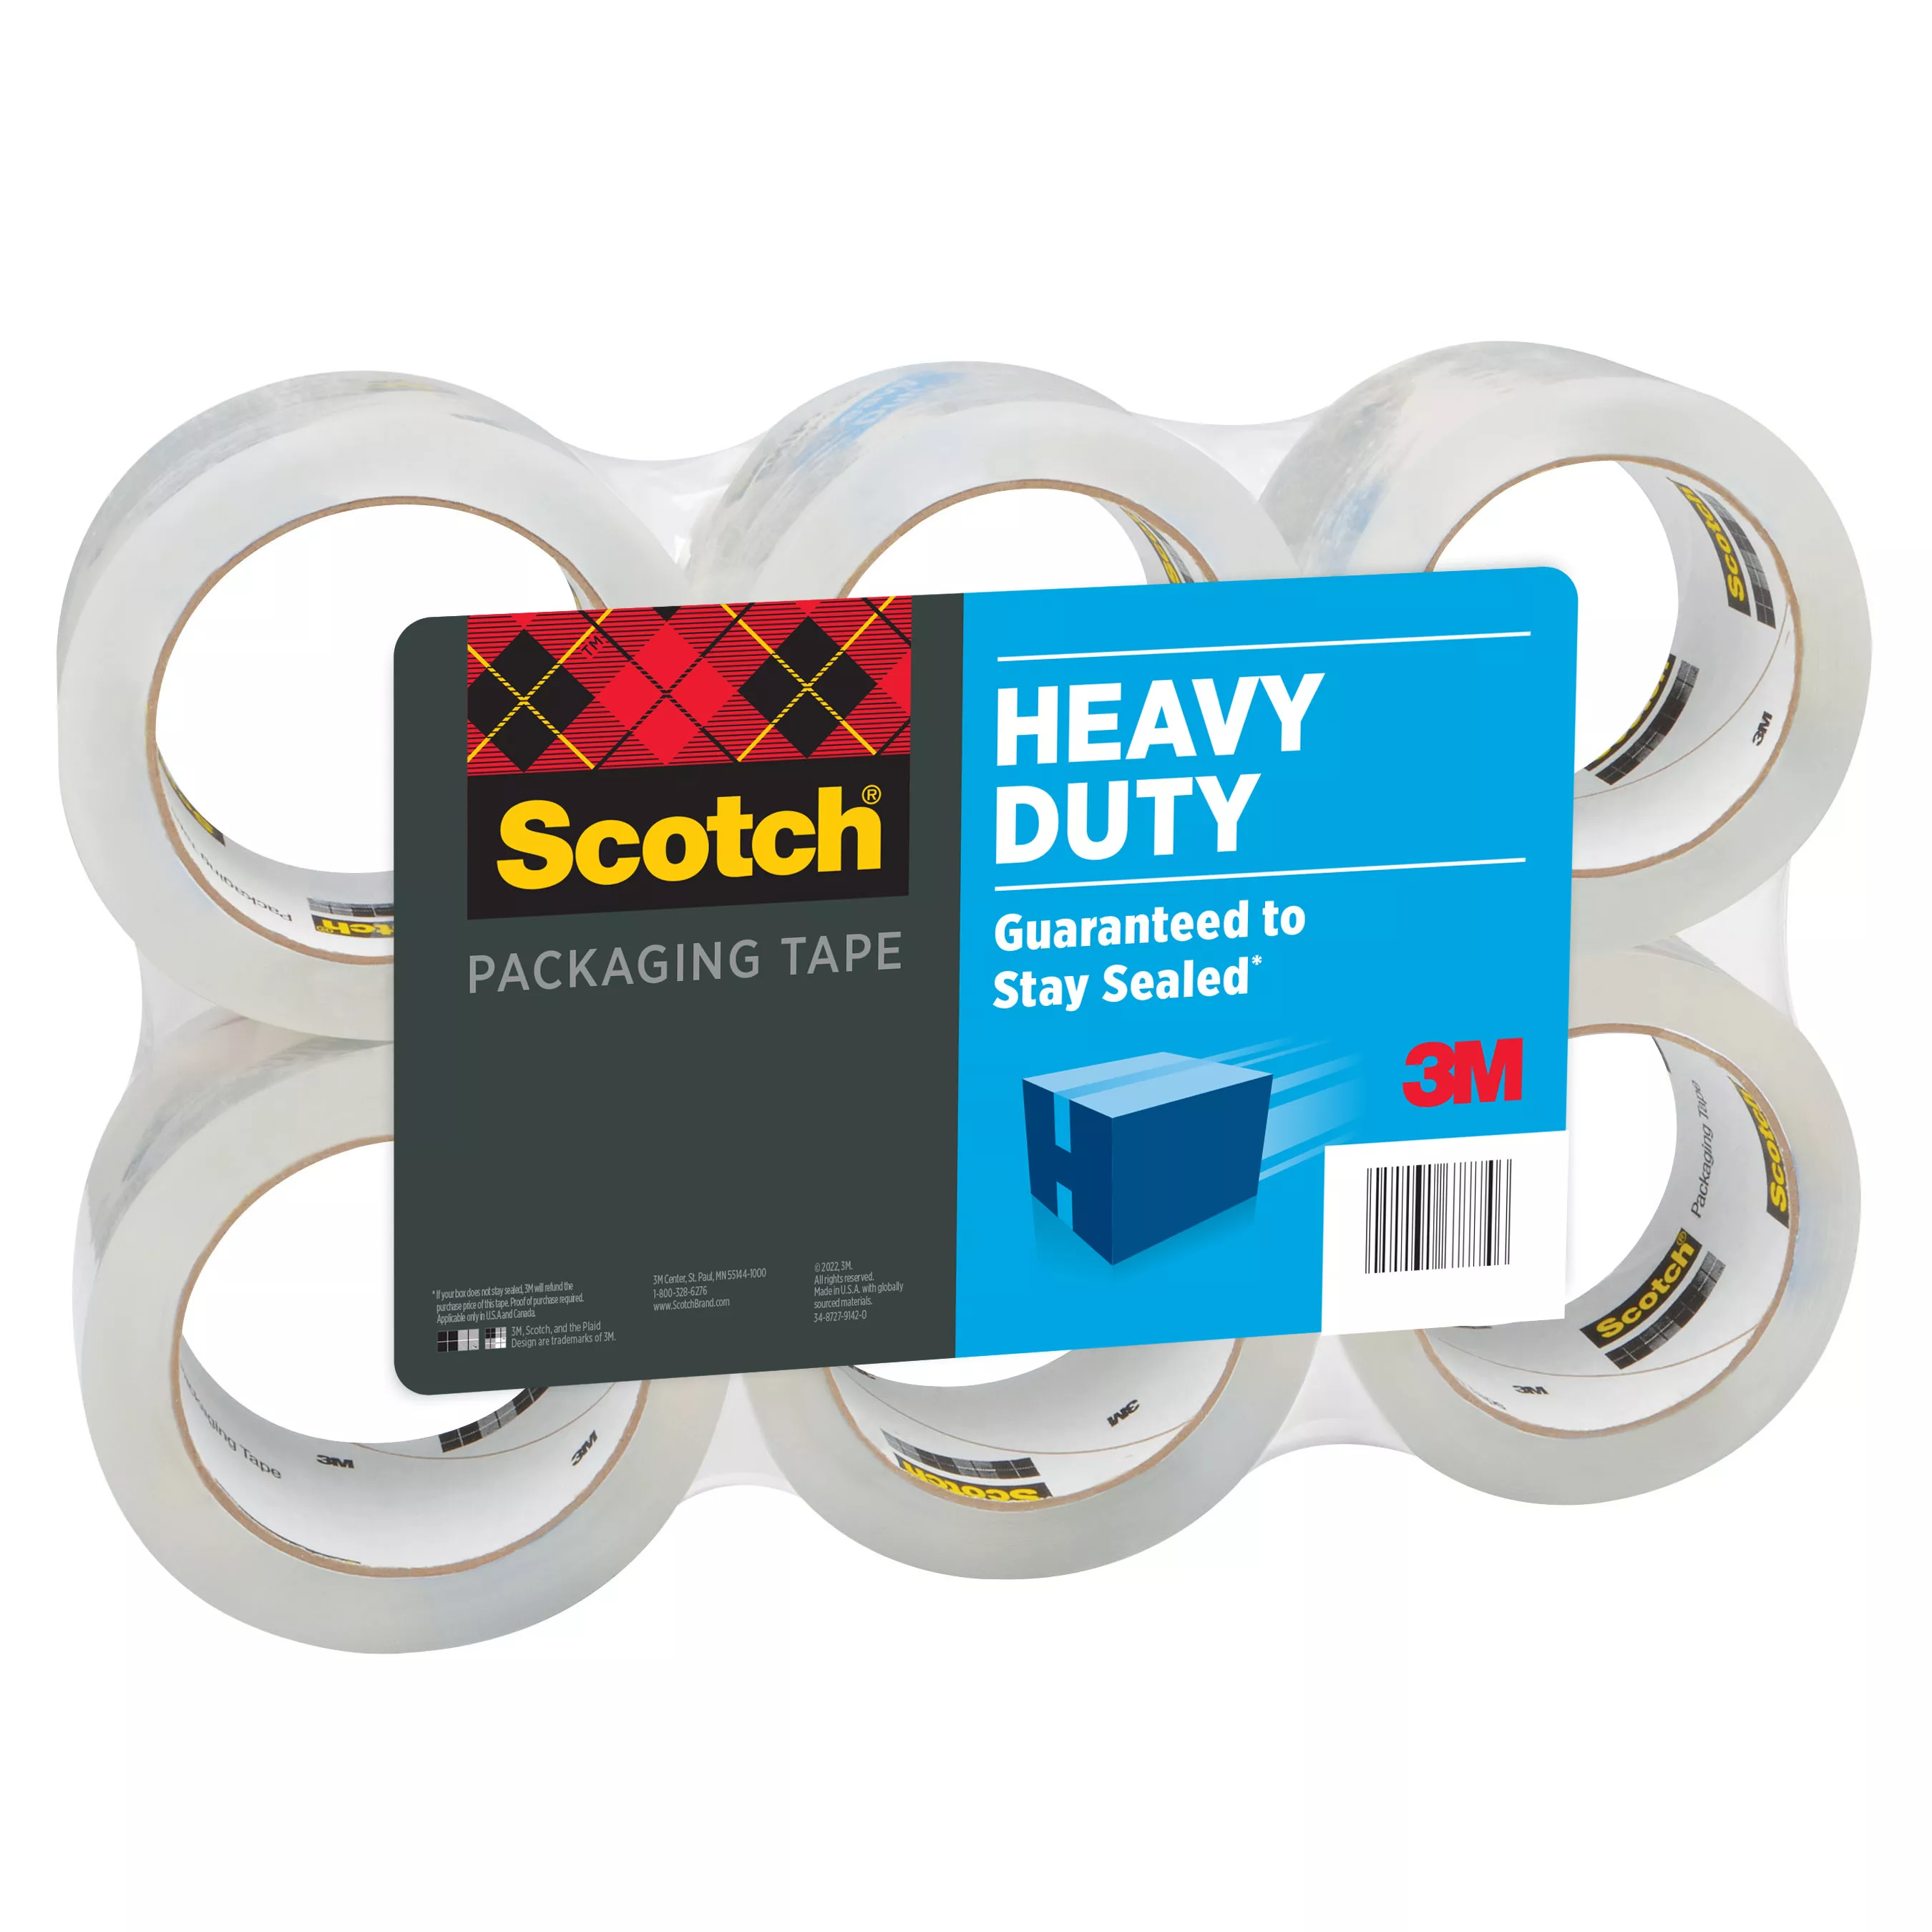 Scotch® Heavy Duty Shipping Packaging Tape, 3850-40-6, 1.88 in x 43.7 yd
(48 mm x 40 m) 6 Pack